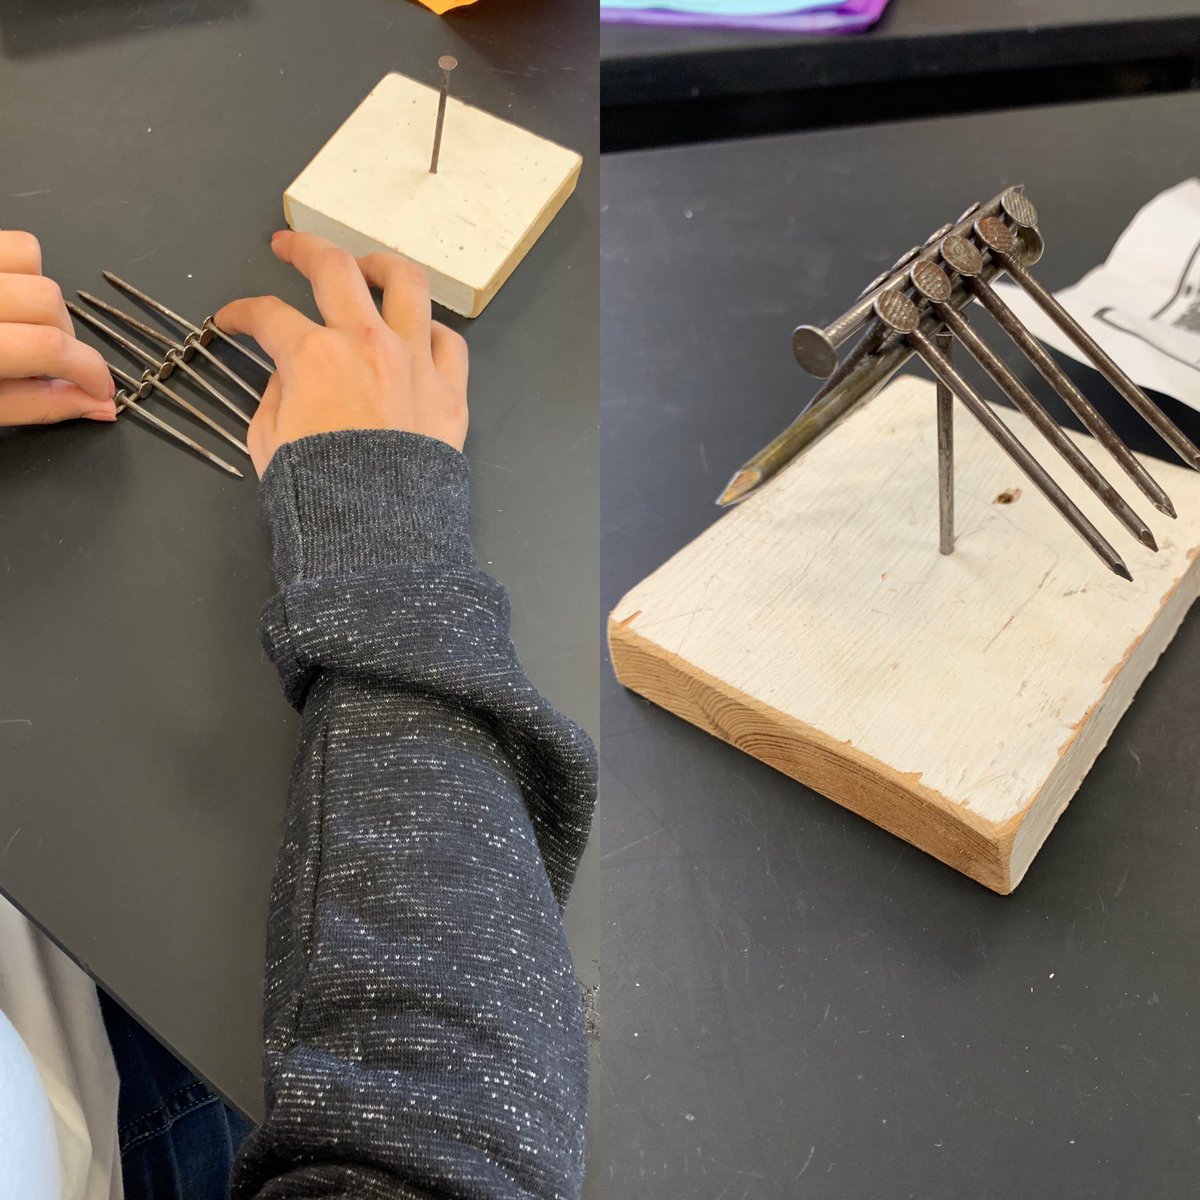 Practicing persistence with the nail challenge. What are your favorite activities that help students learn from failure? #teacherlife #STEMeducation #AISDGameChangers #AISDProud @BMSBears